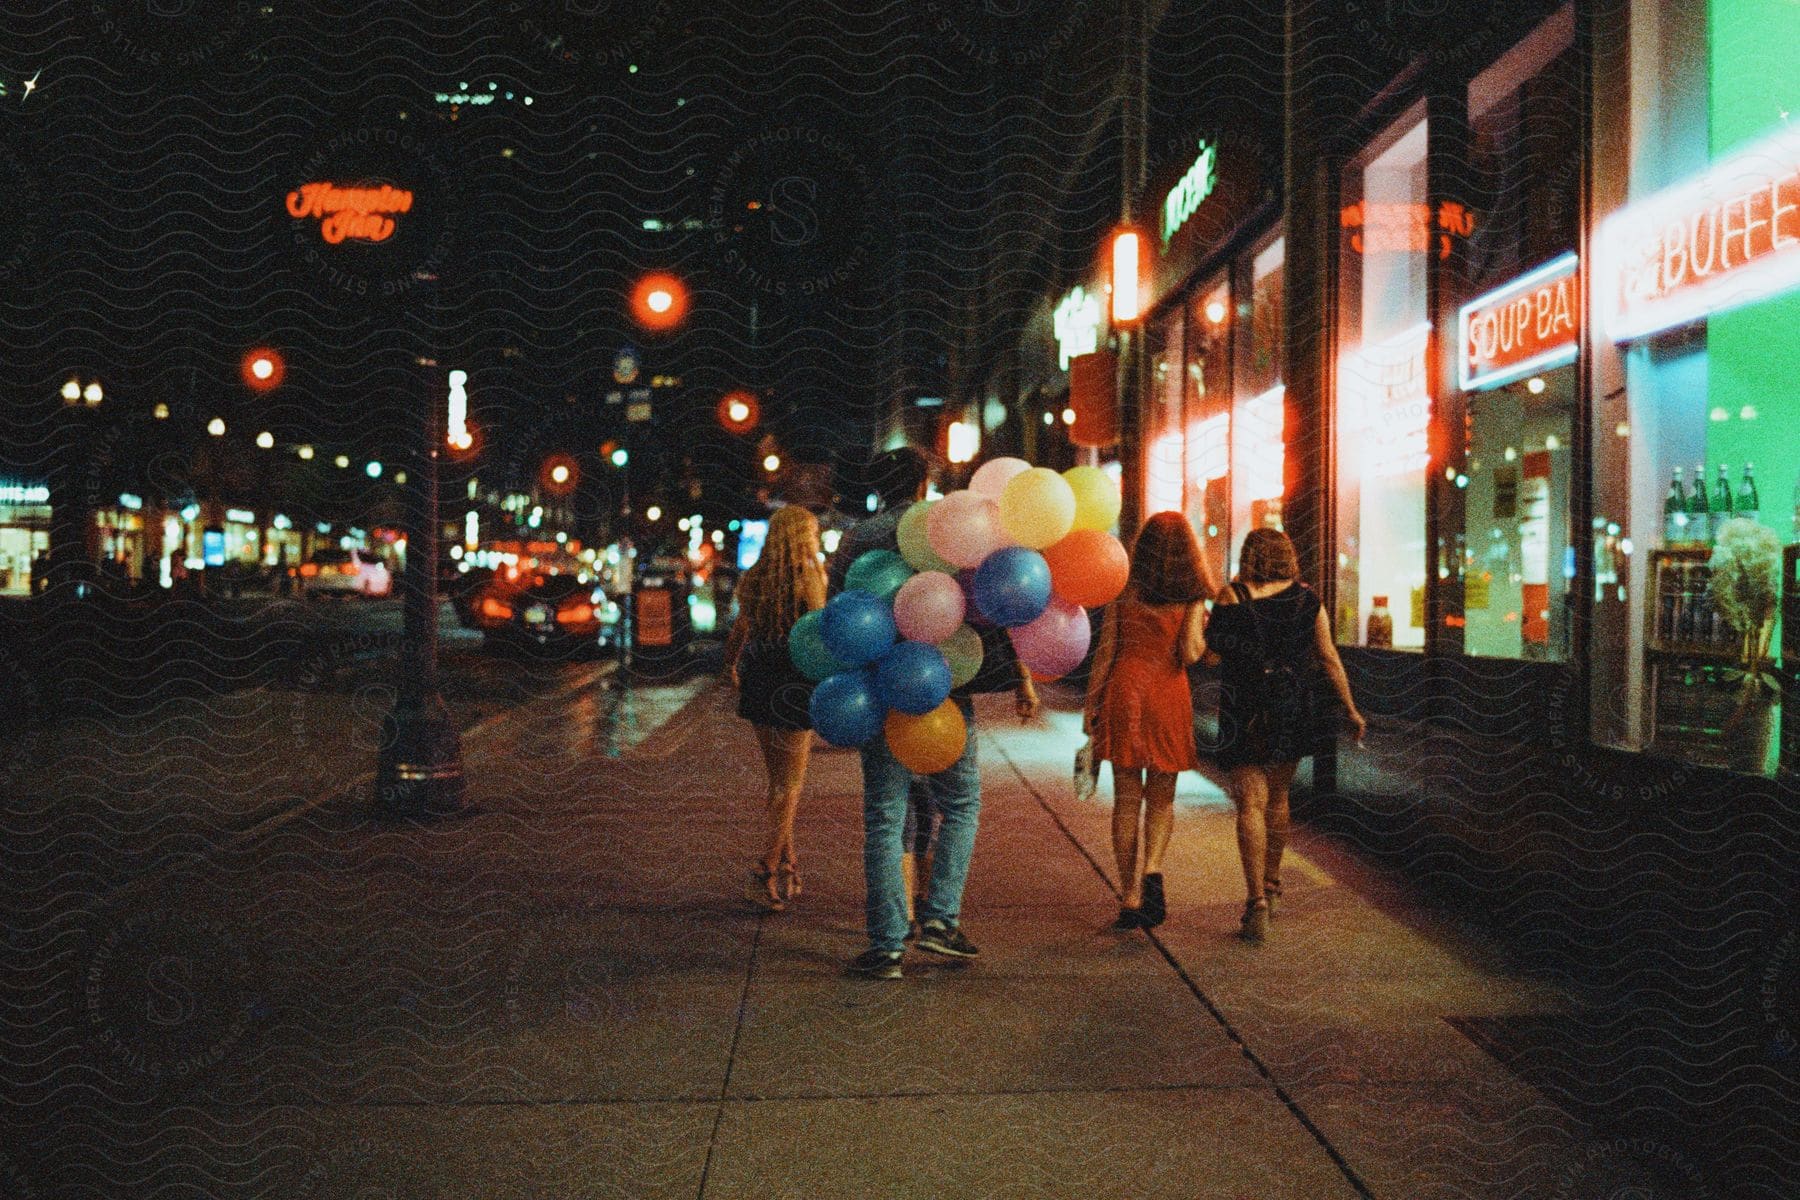 People walking with their backs turned on a sidewalk at night in a metropolis.